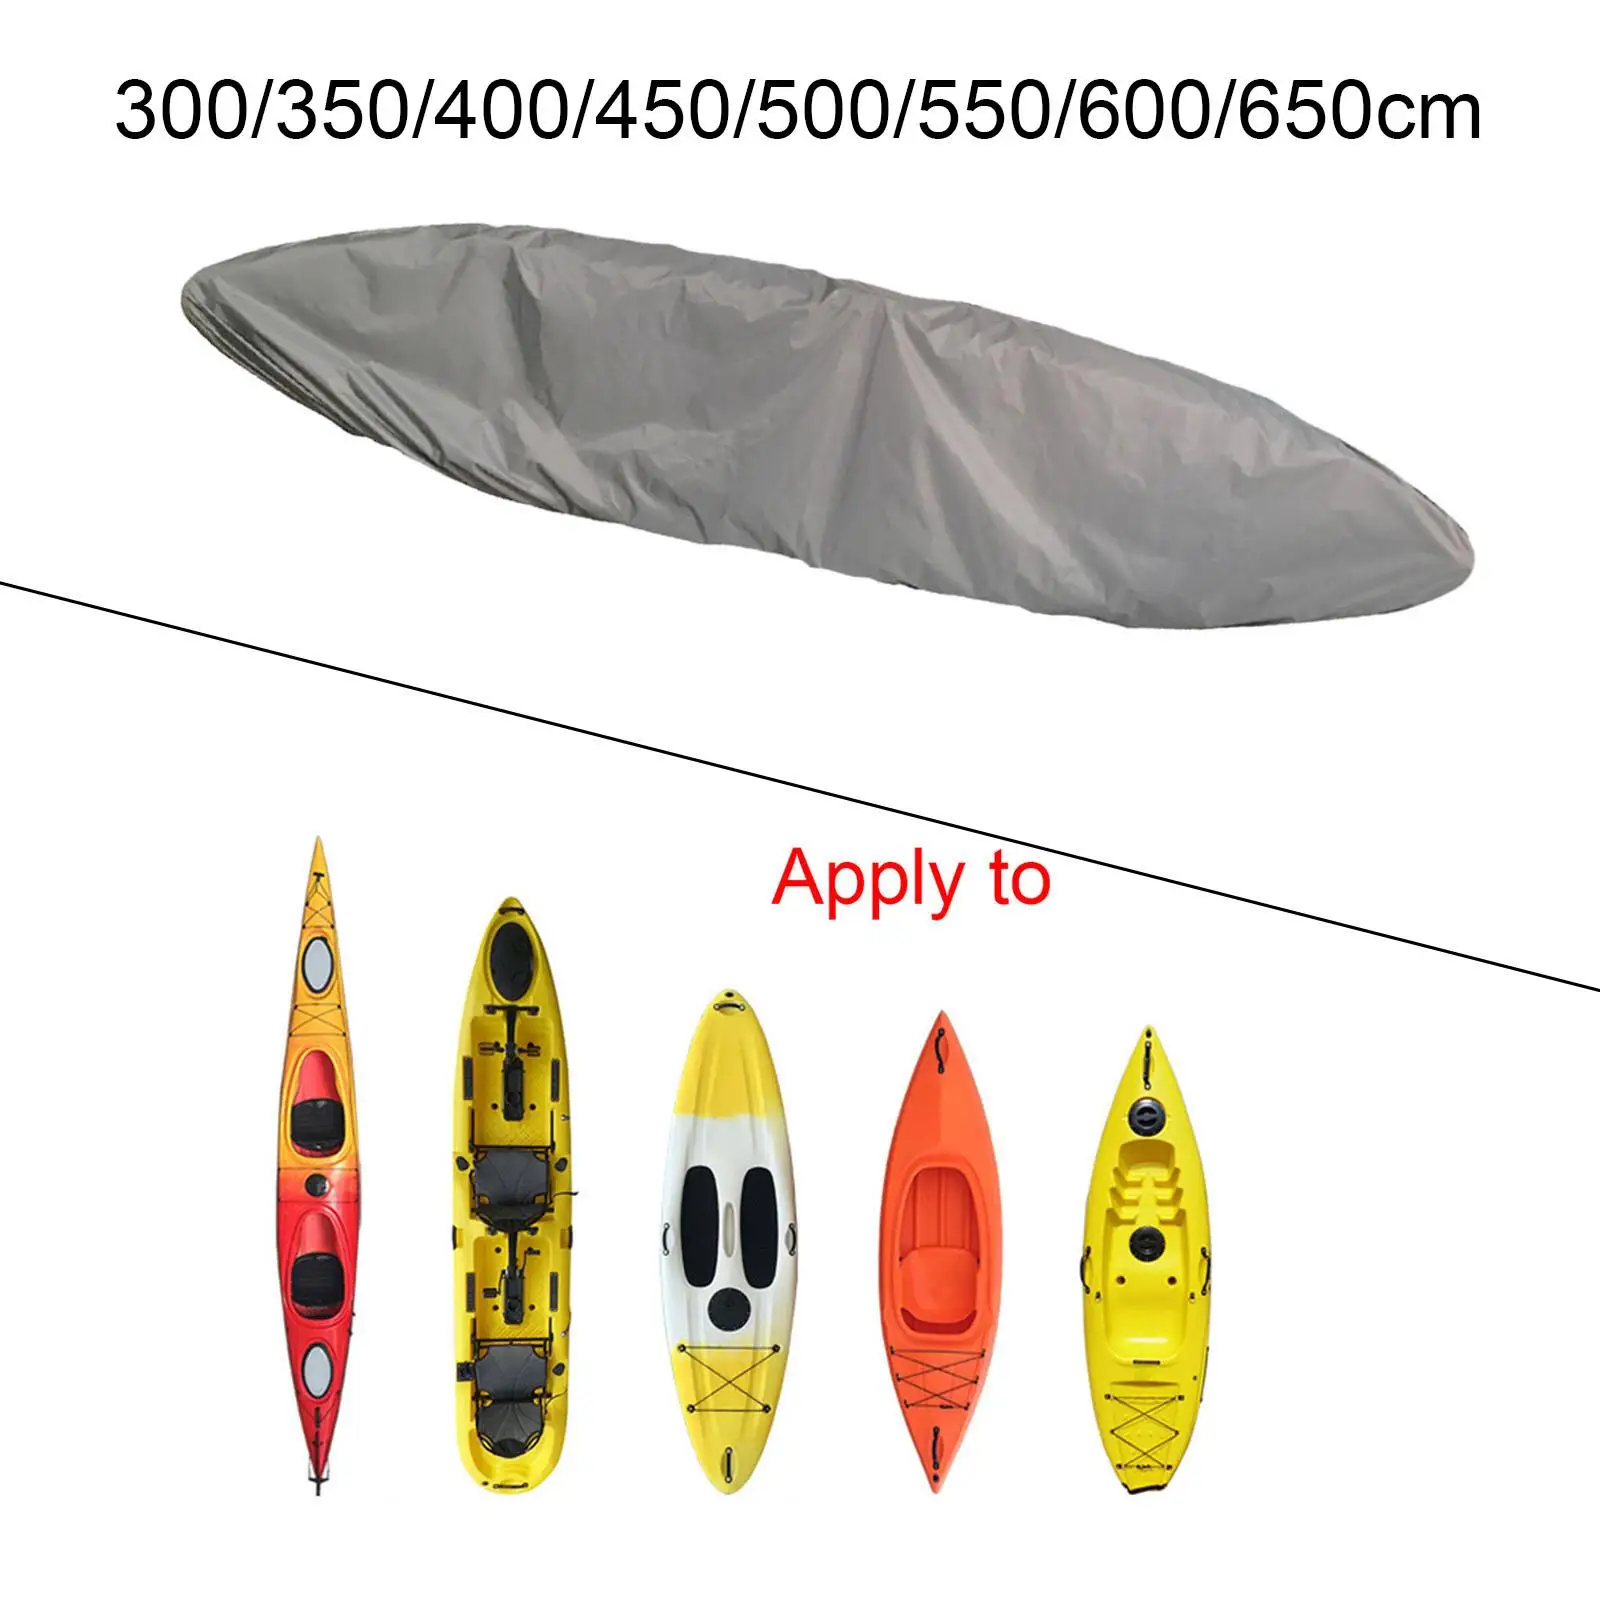 Boat storage dust cover, canoe cover, indoor outdoor storage dust cover,